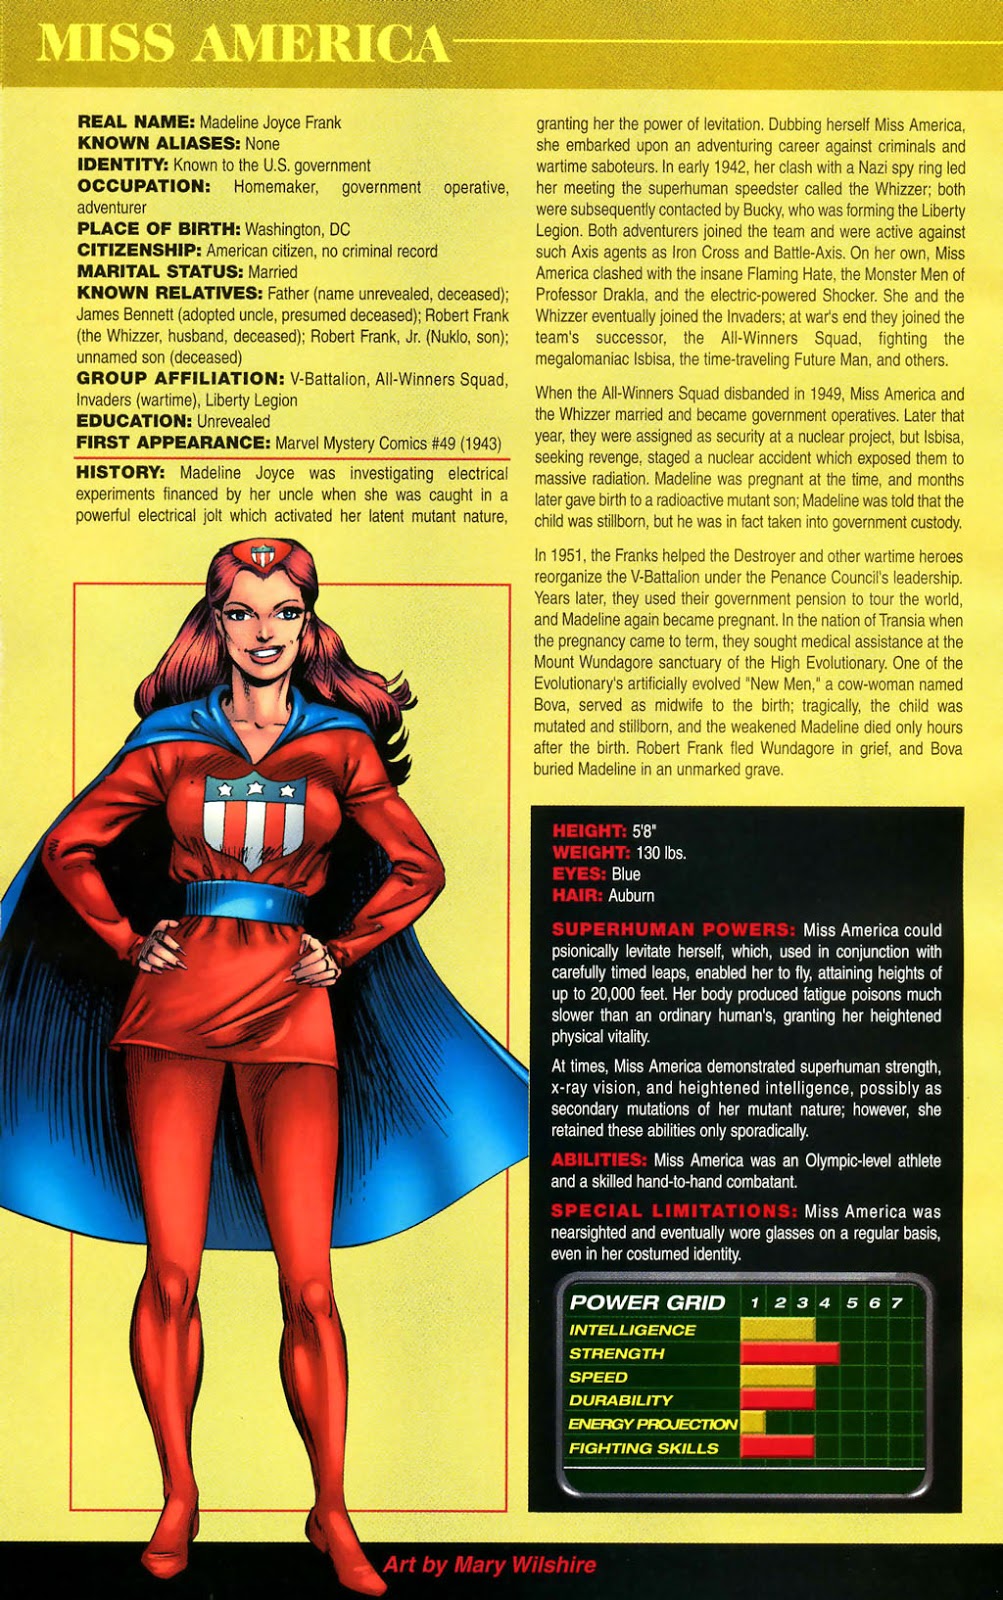 Marvel miss america What Was